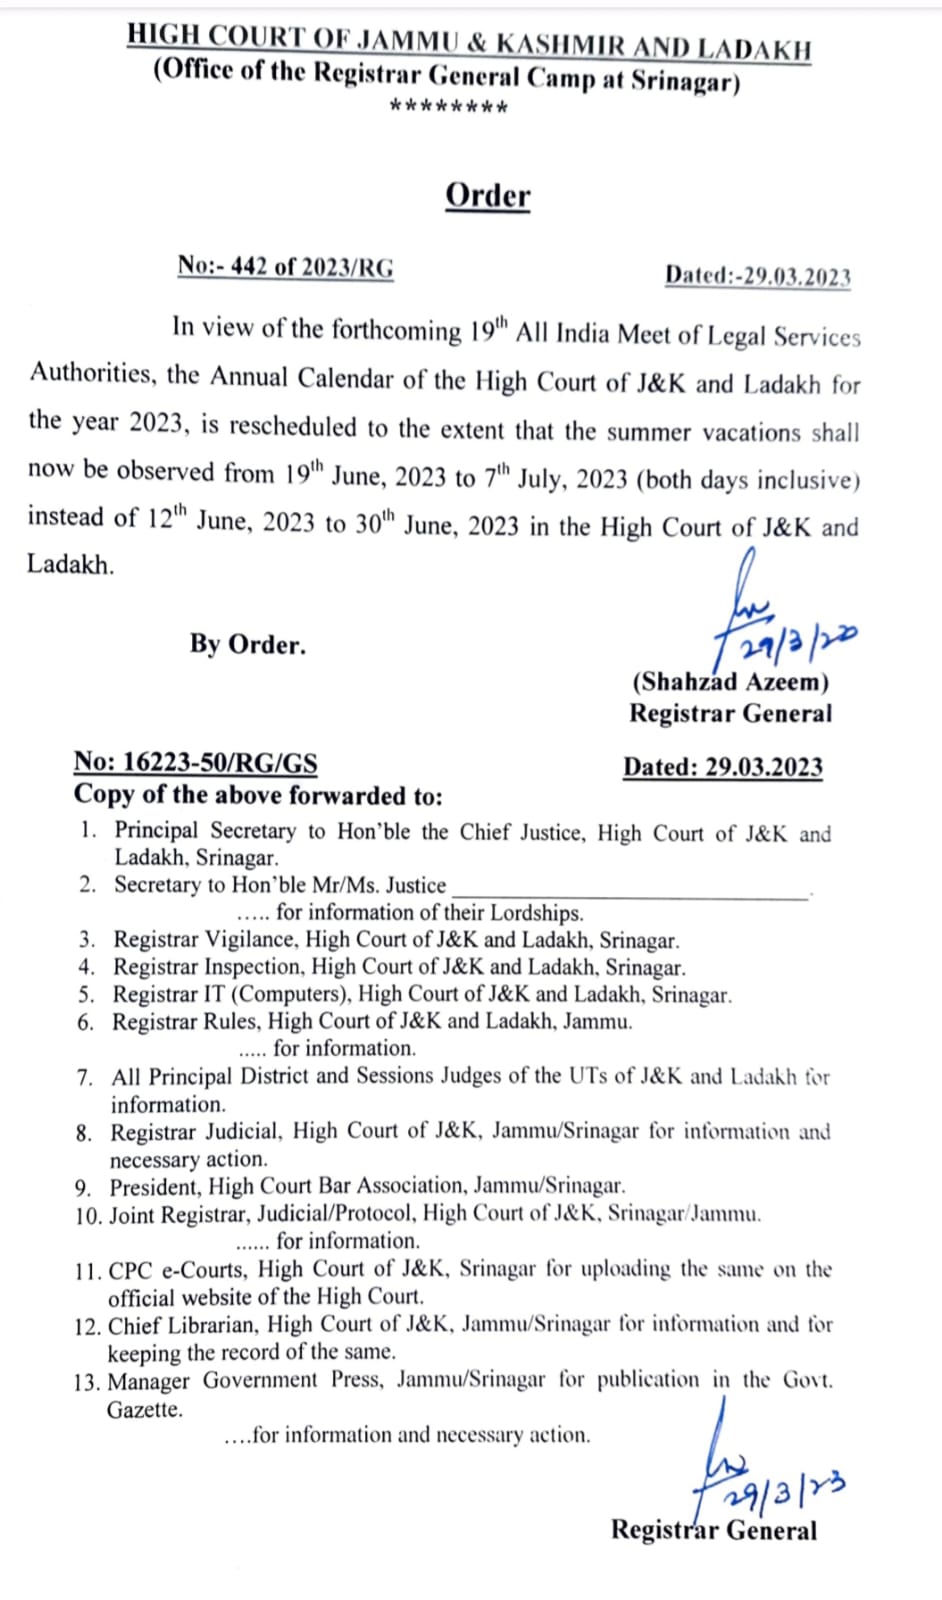 J&K high court to observe summer vacations from June 19 till July 7